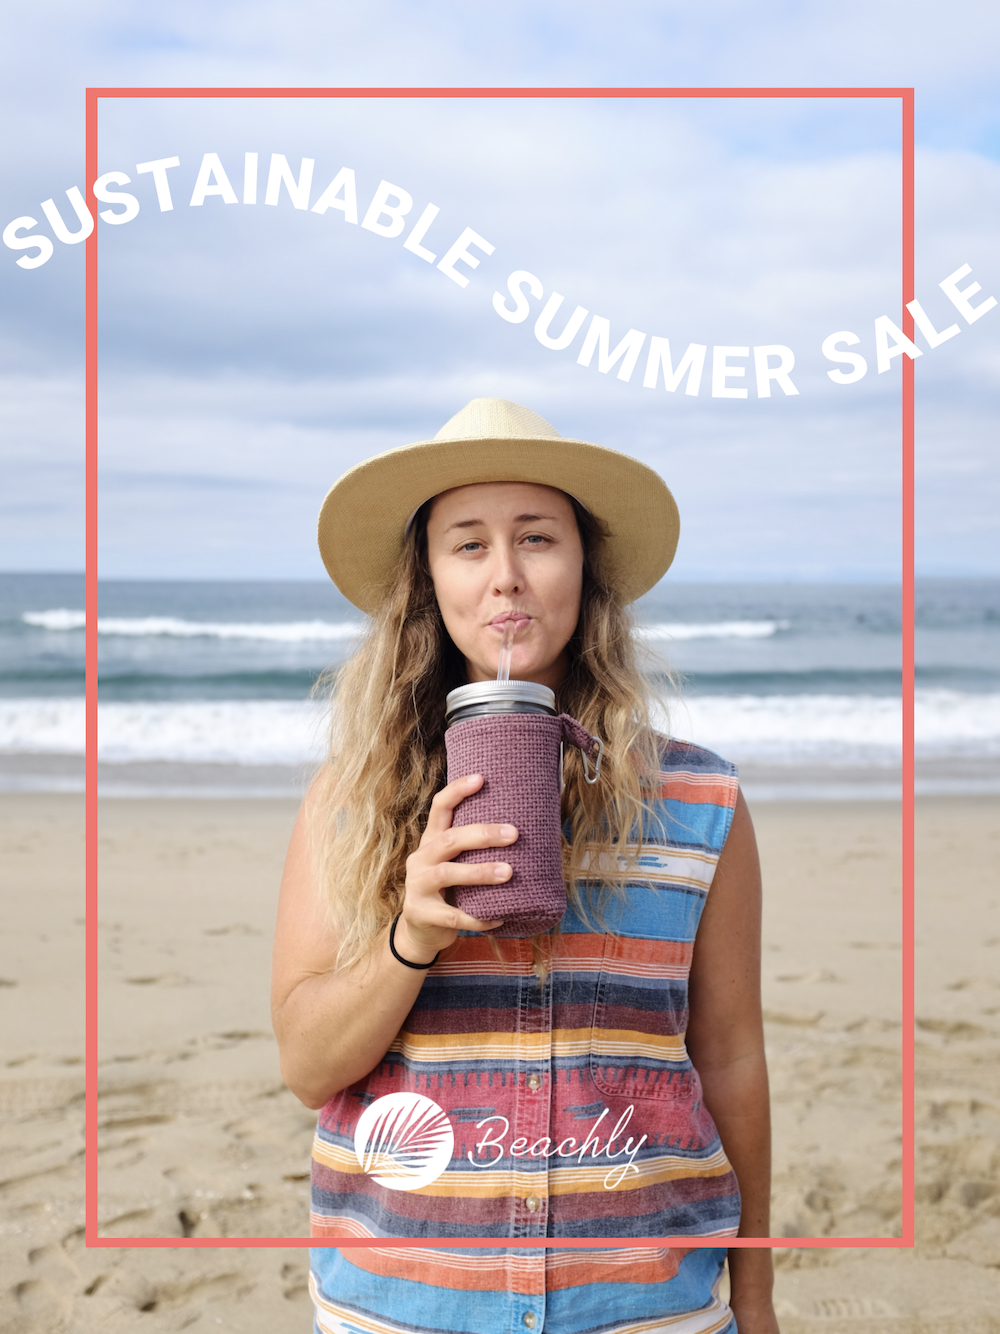 Beachly’s Sustainable Summer Sale Is On, Featuring Simply Straws and More